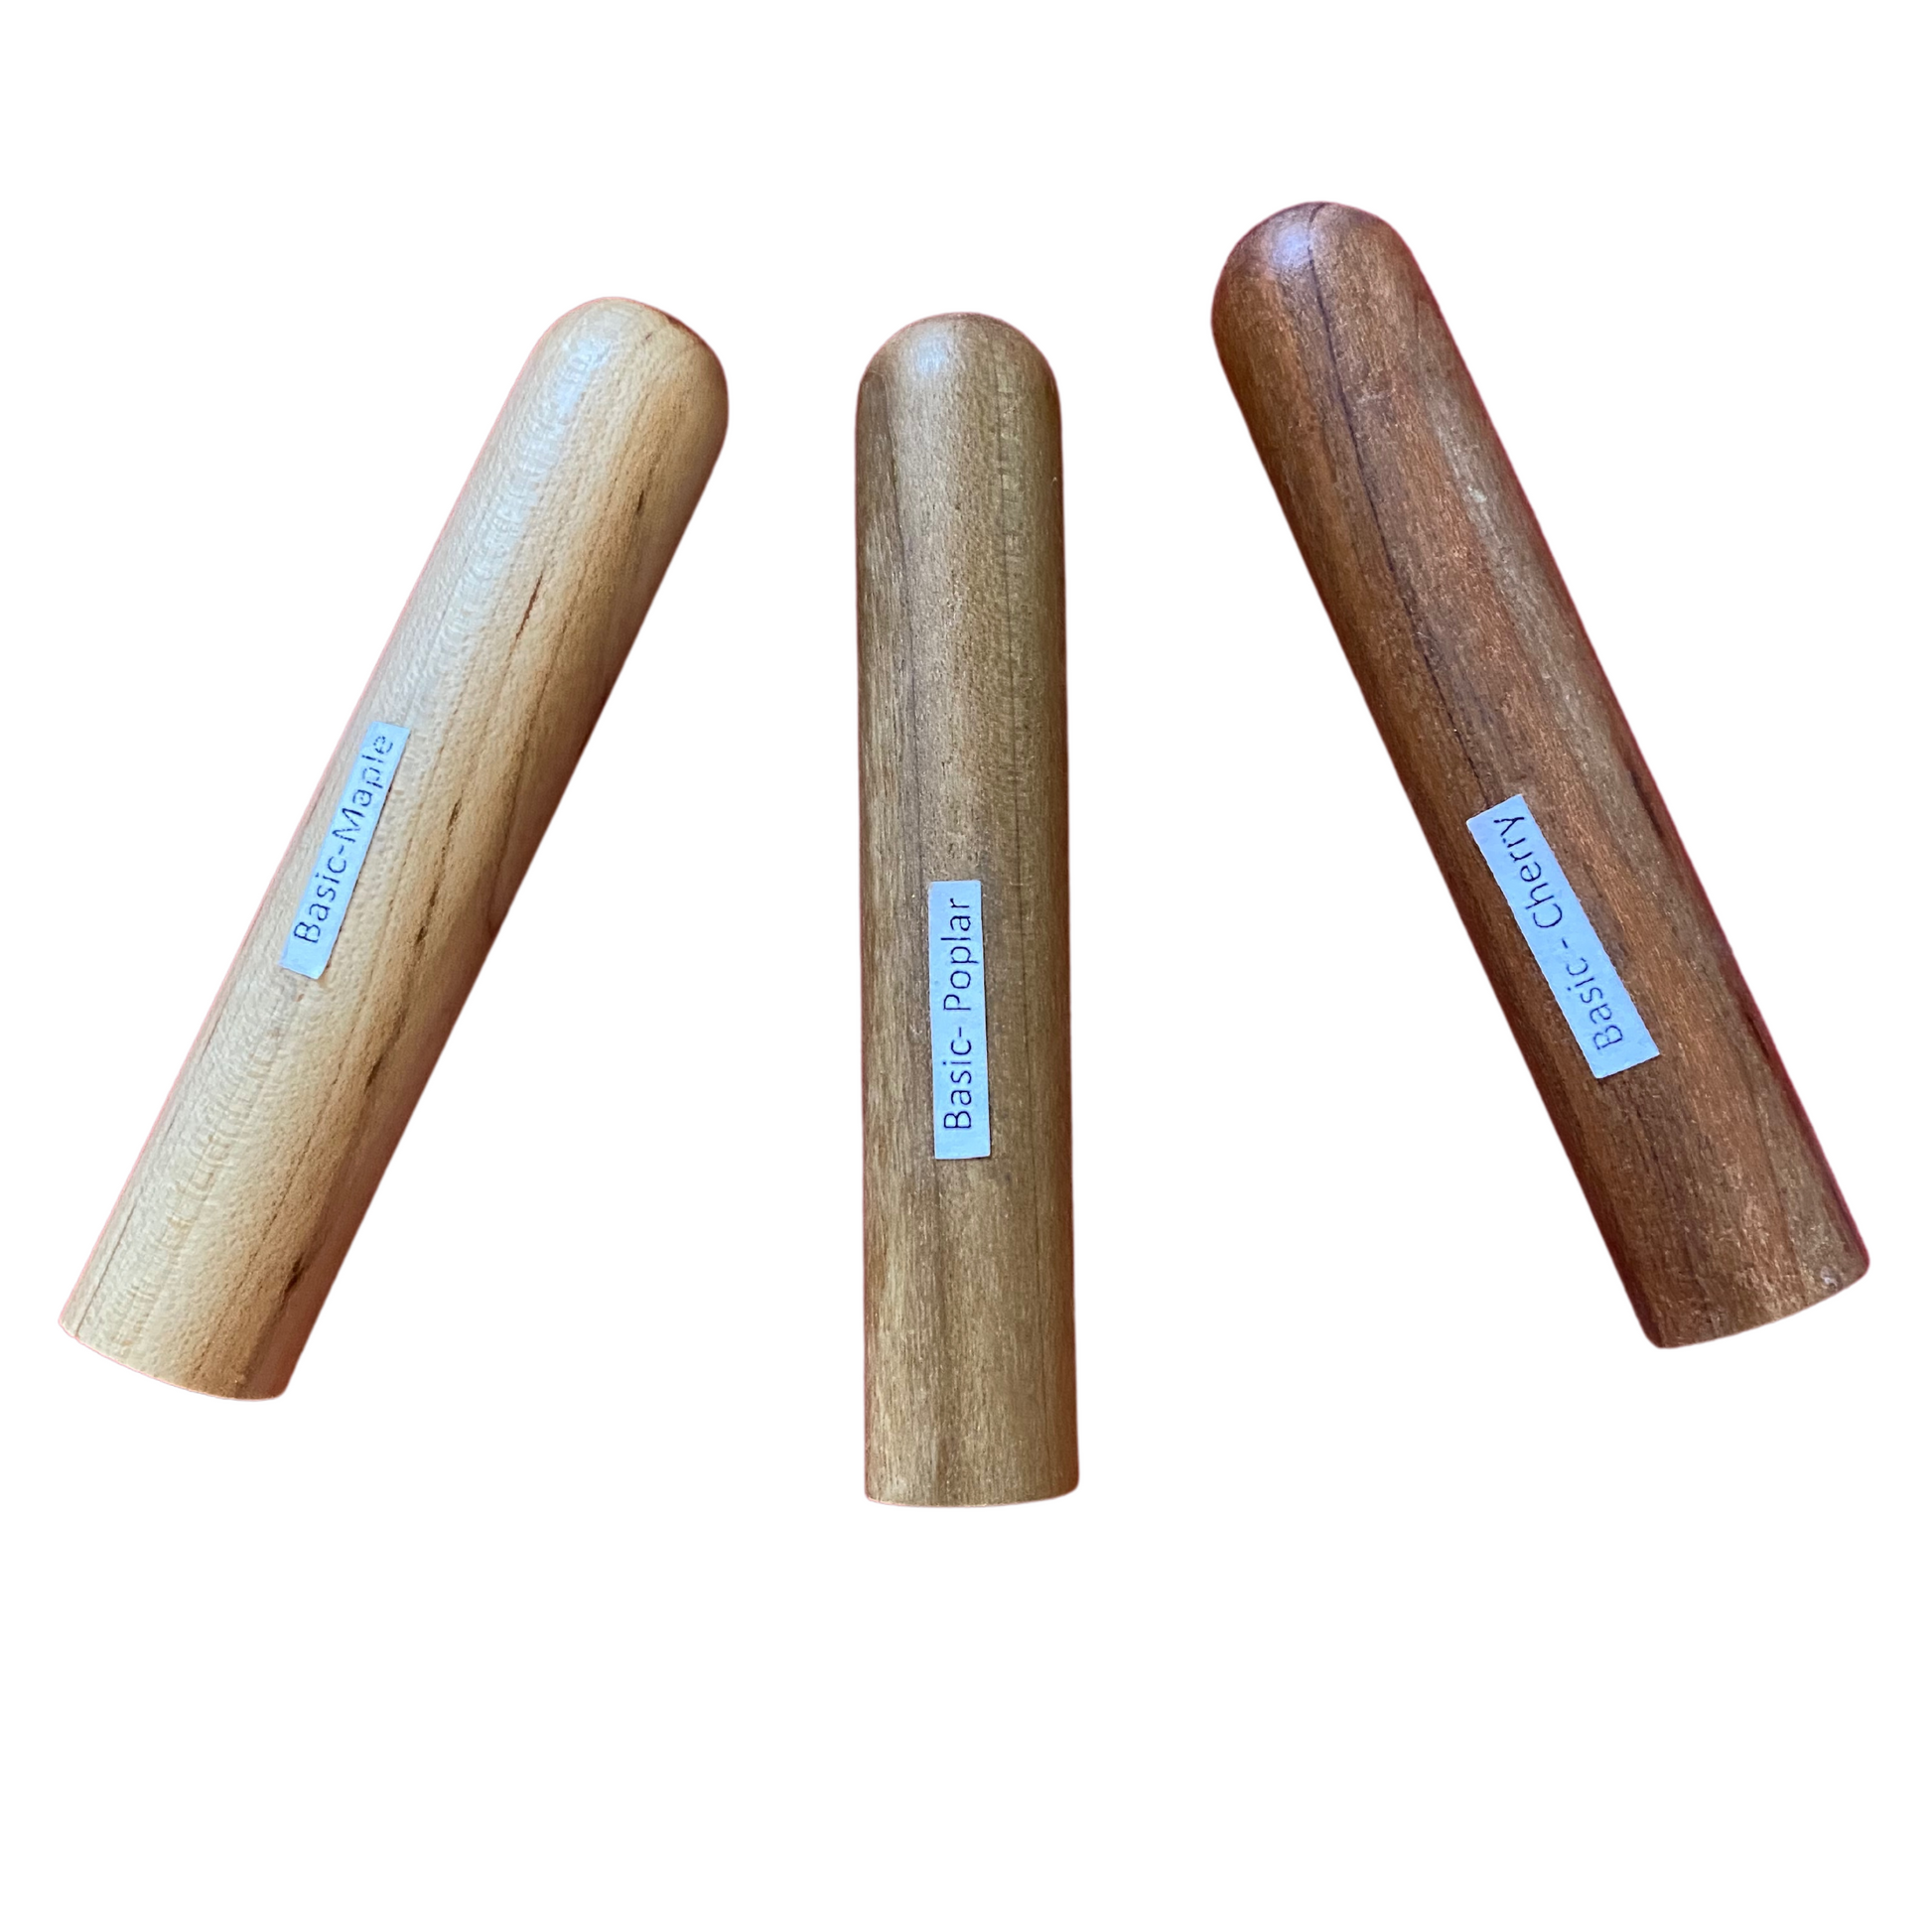 Maple, Poplar and Cherry Basic Wood Handle Standard Fire Massage Torches without torch heads.